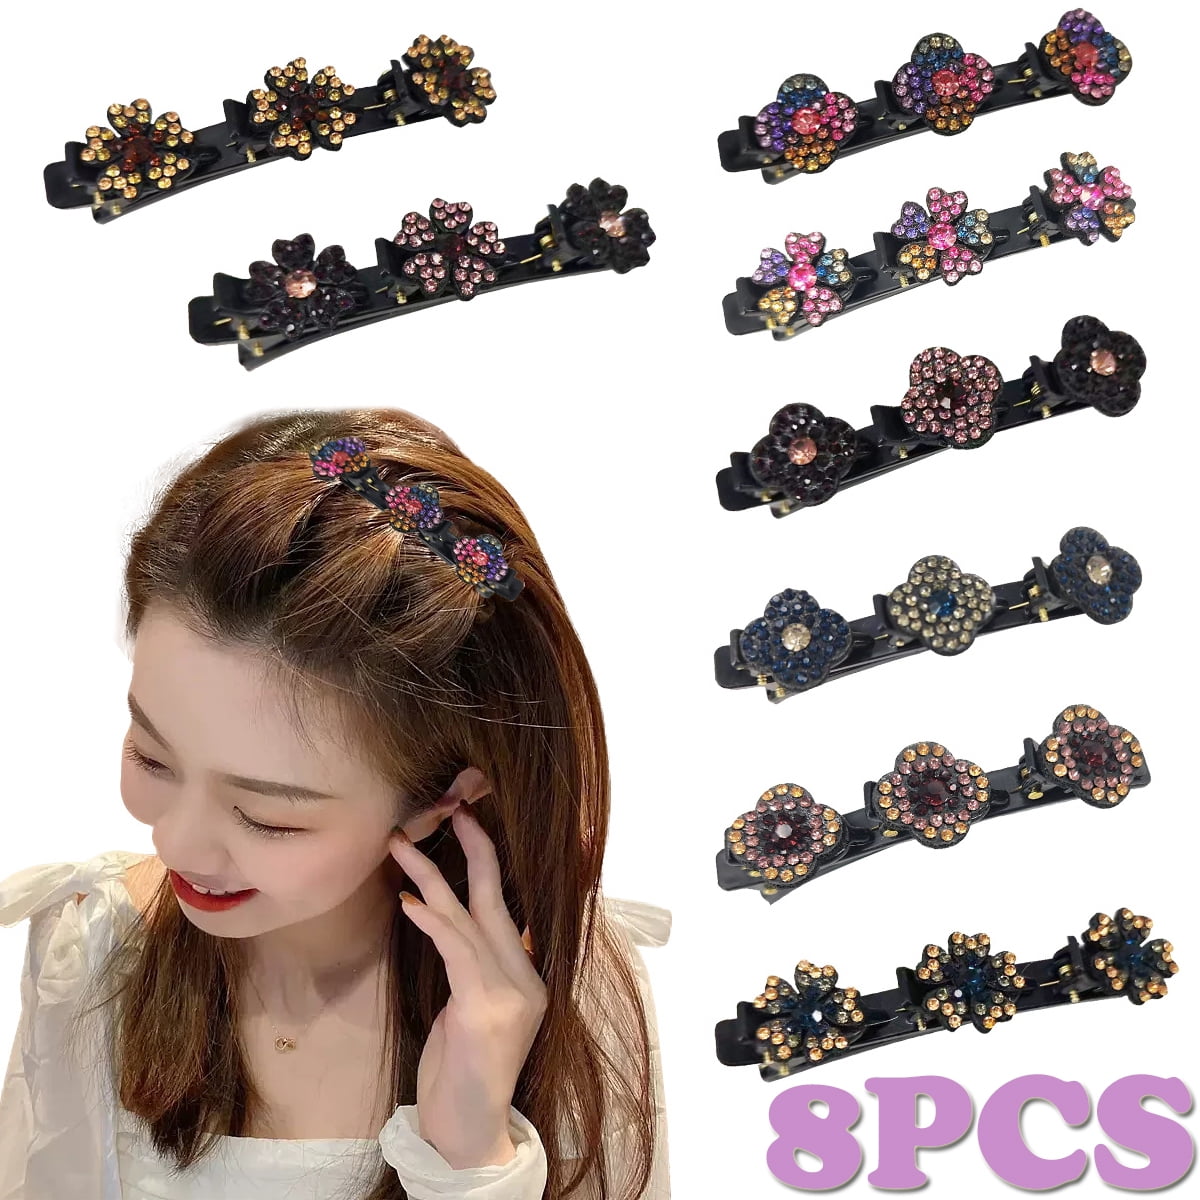 15 Pcs Hairpin Hair Styling Accessories Girls Hair Accessories